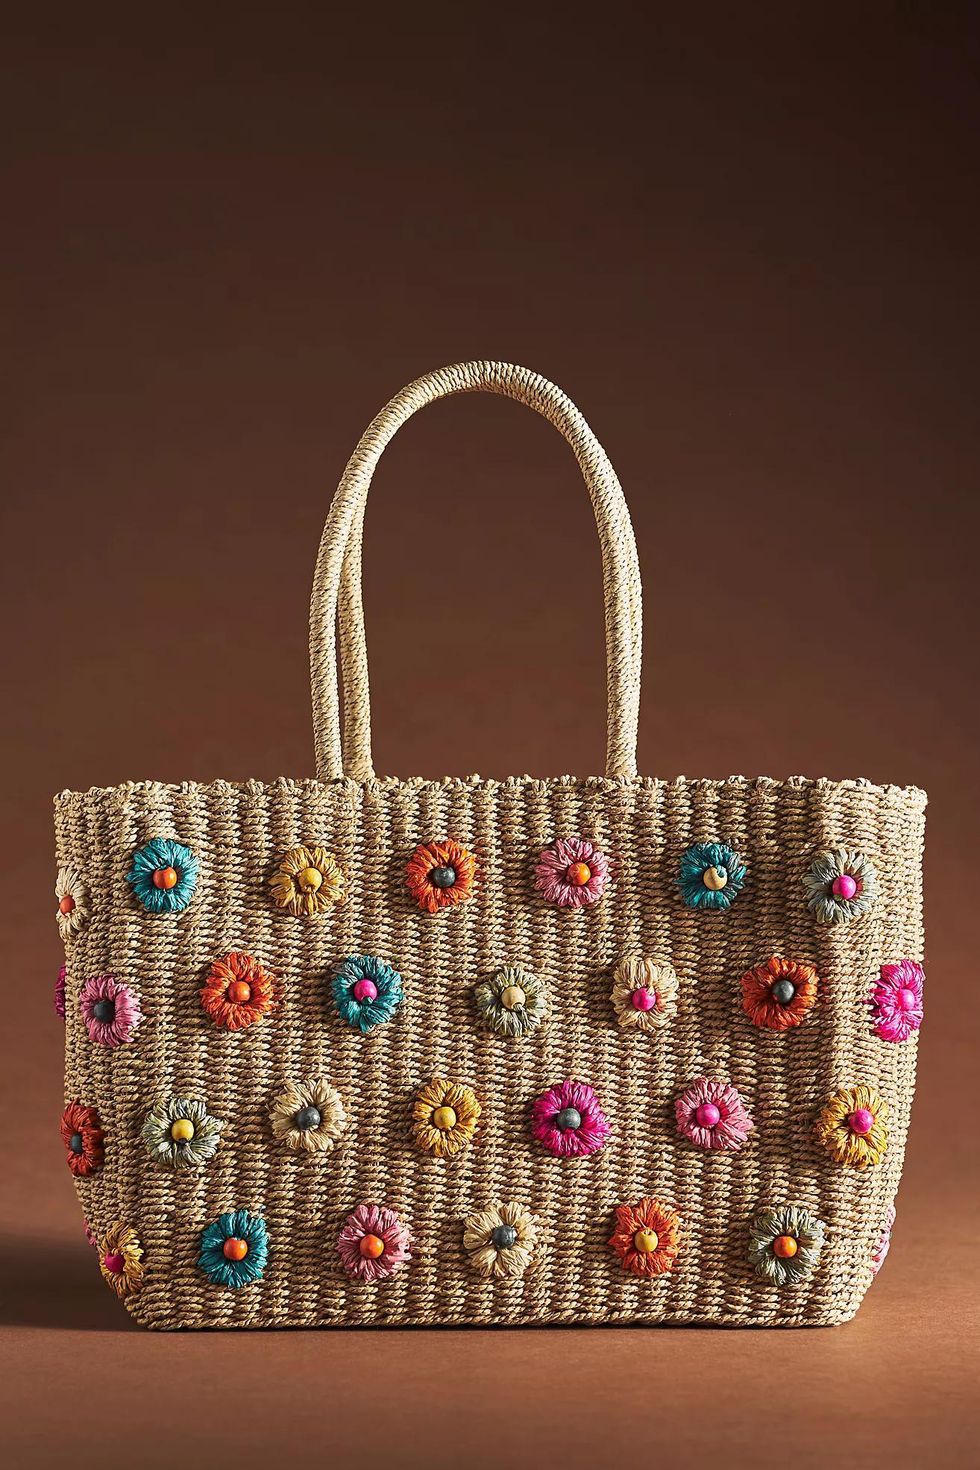 Large Straw Tote That Will Hold All of Your Stuff! - A Slice of Style